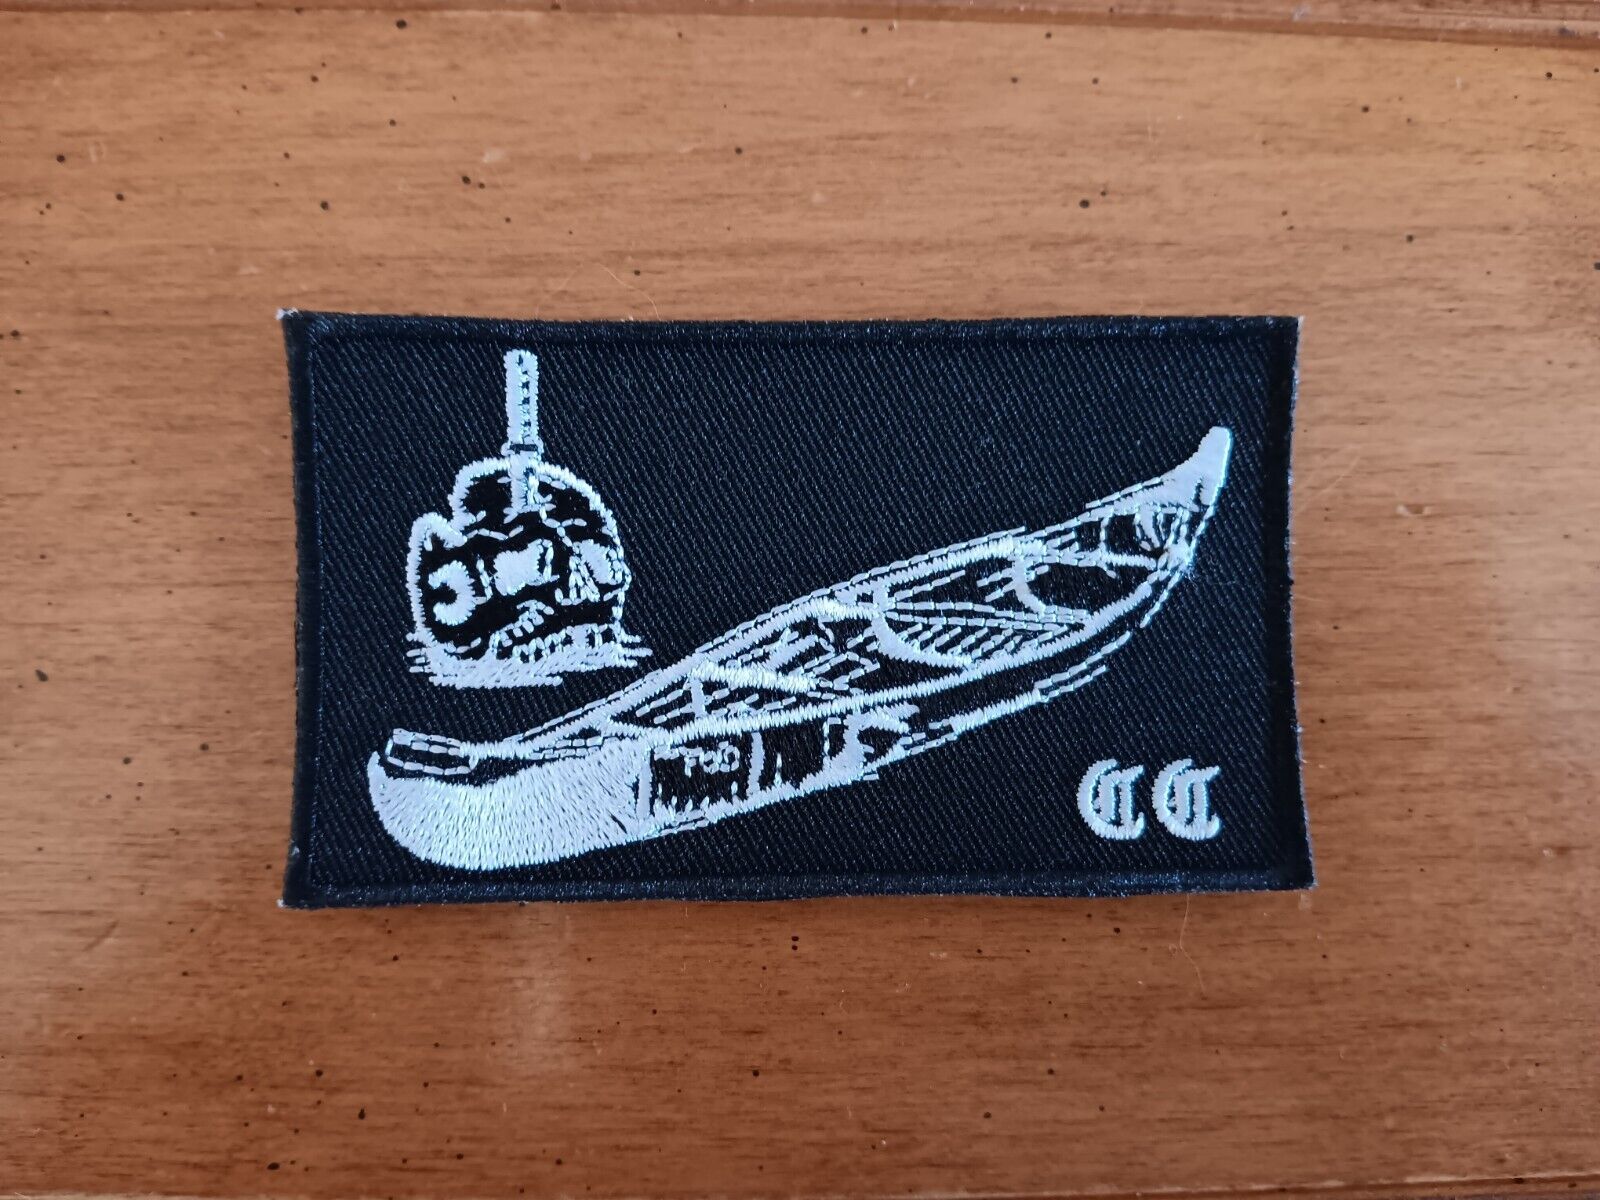 Forward Observations Group Canoe Club Patch Black 2x3